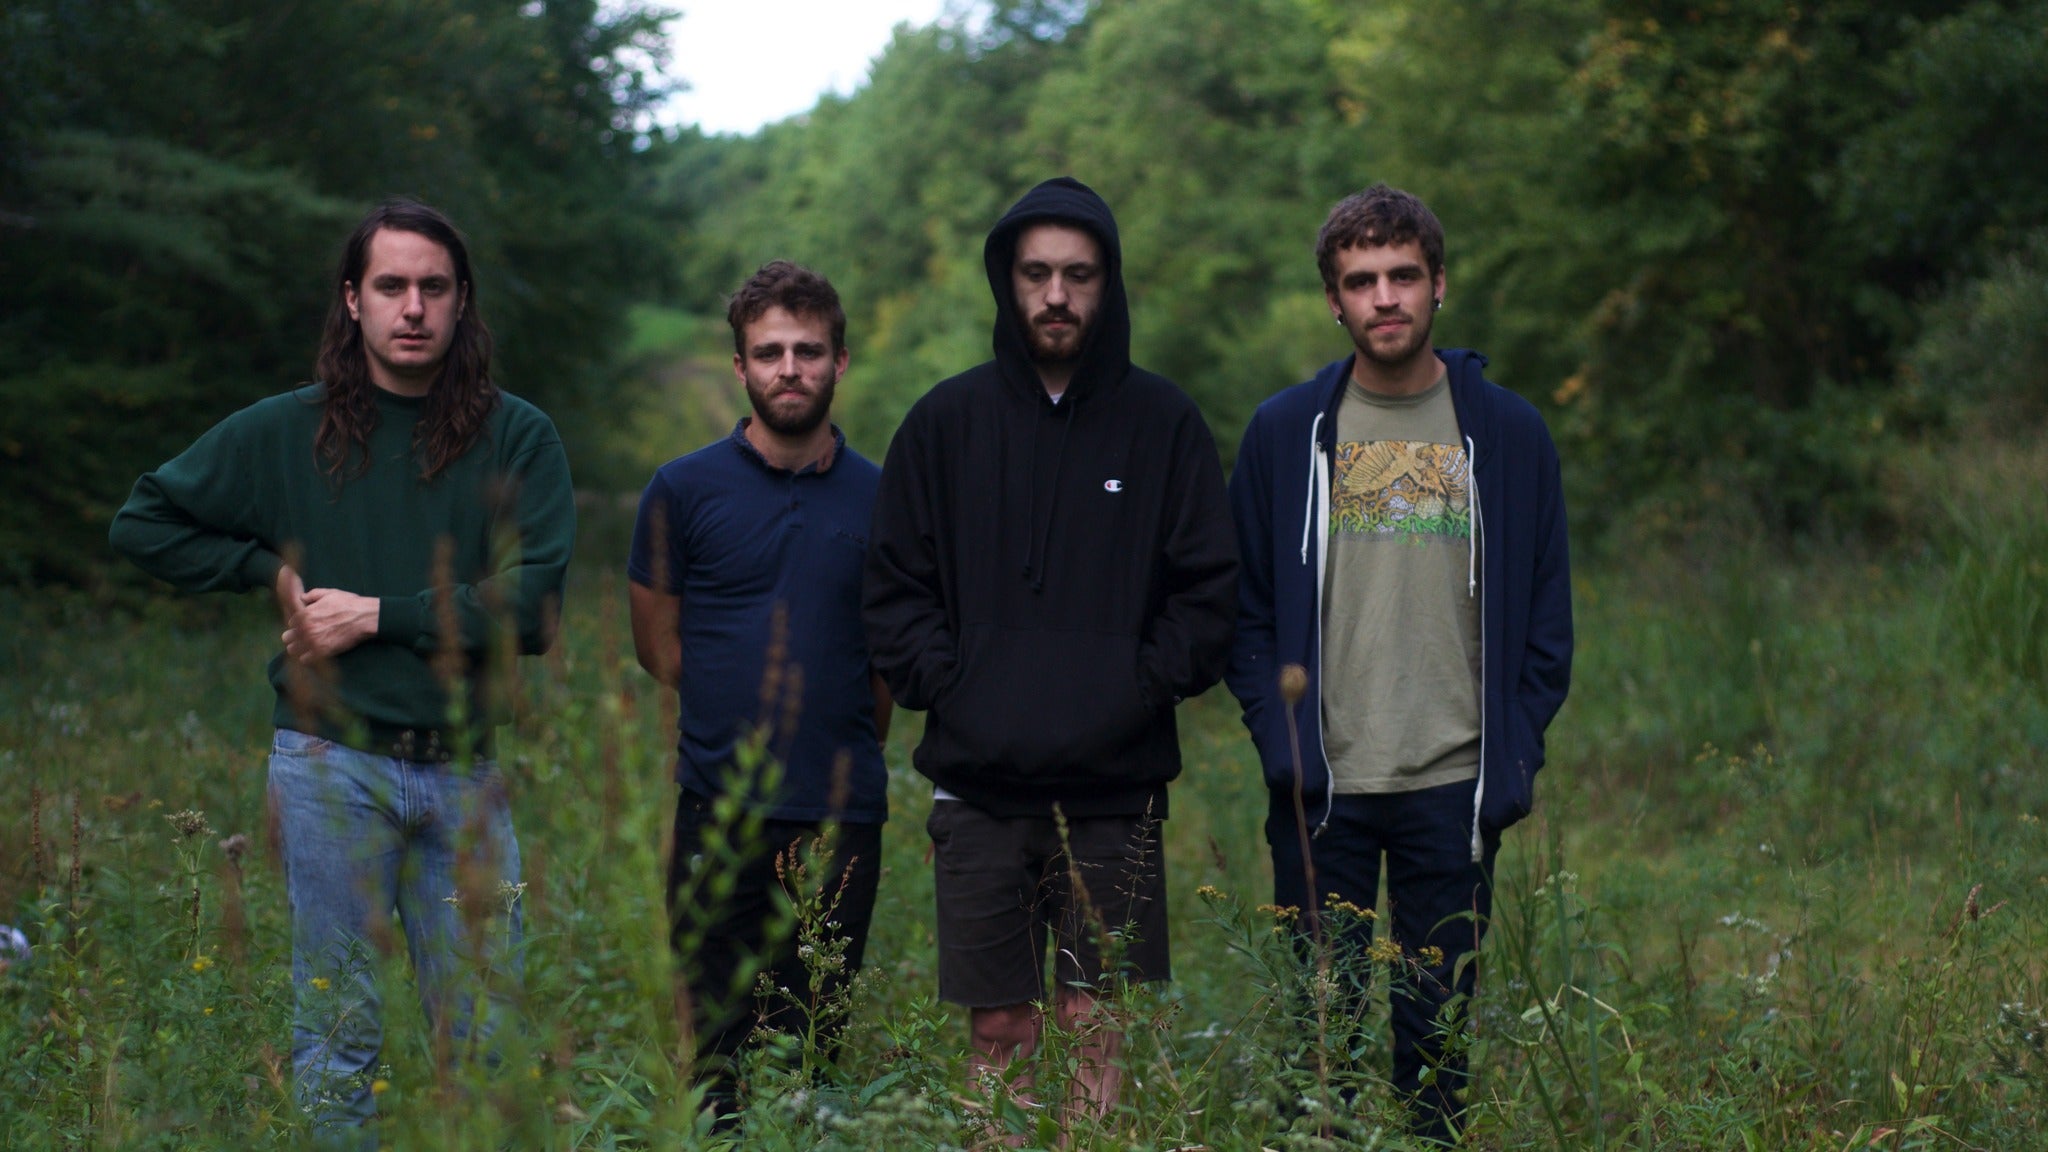 The Hotelier + Foxing pre-sale code for event tickets in Los Angeles, CA (The Regent Theater)